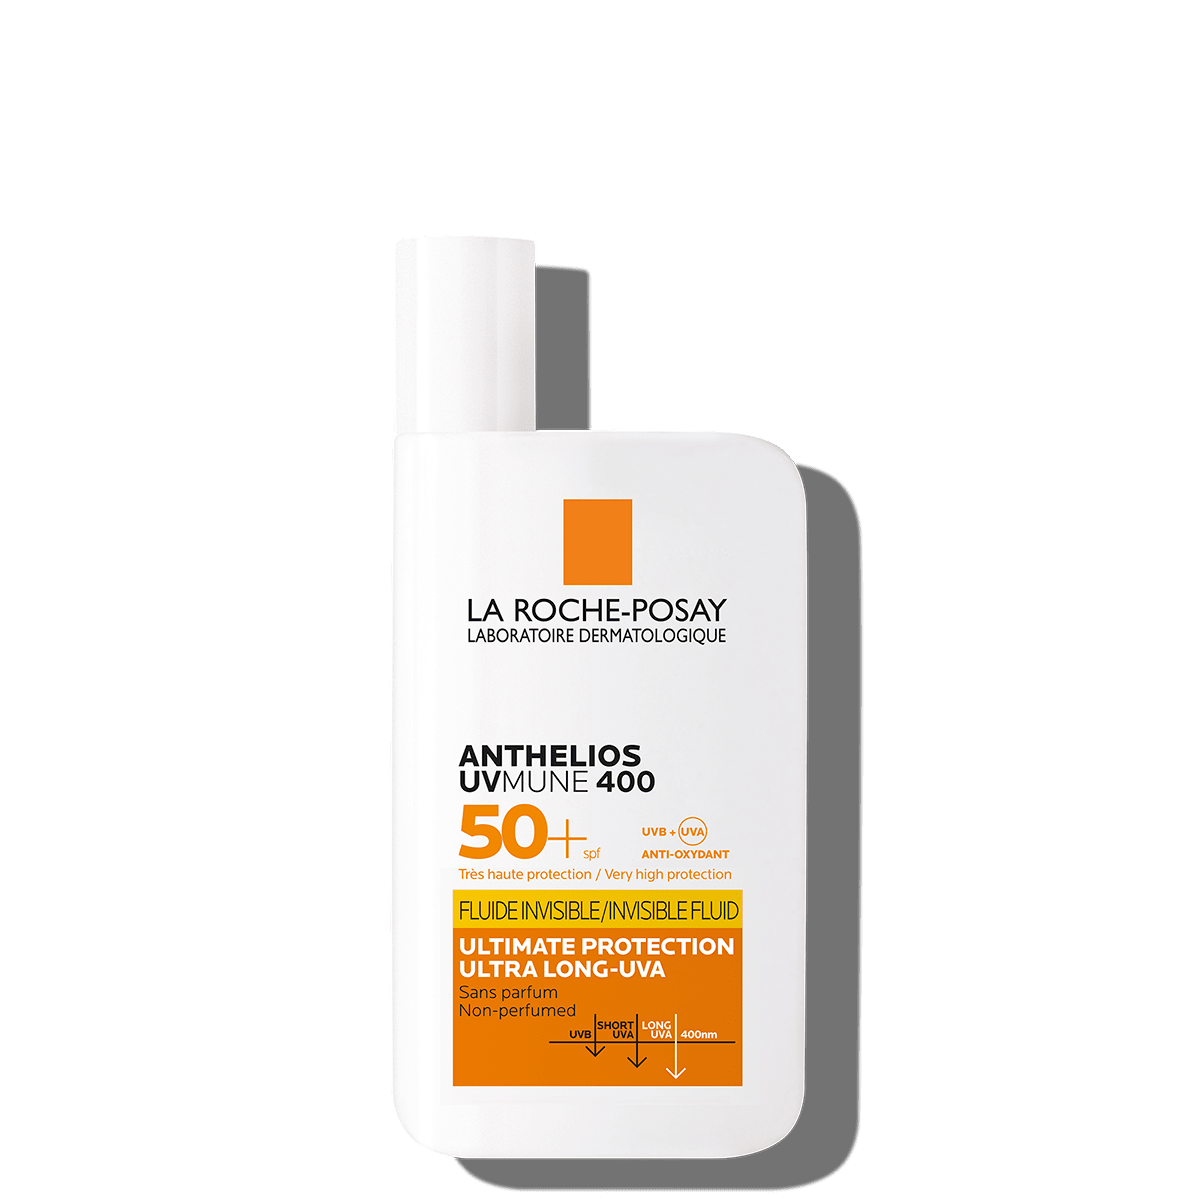 lrp-ProductPage-Sun-Anthelios-UVMune400-Fluid-SP-spf50+-3337875797597-front.png